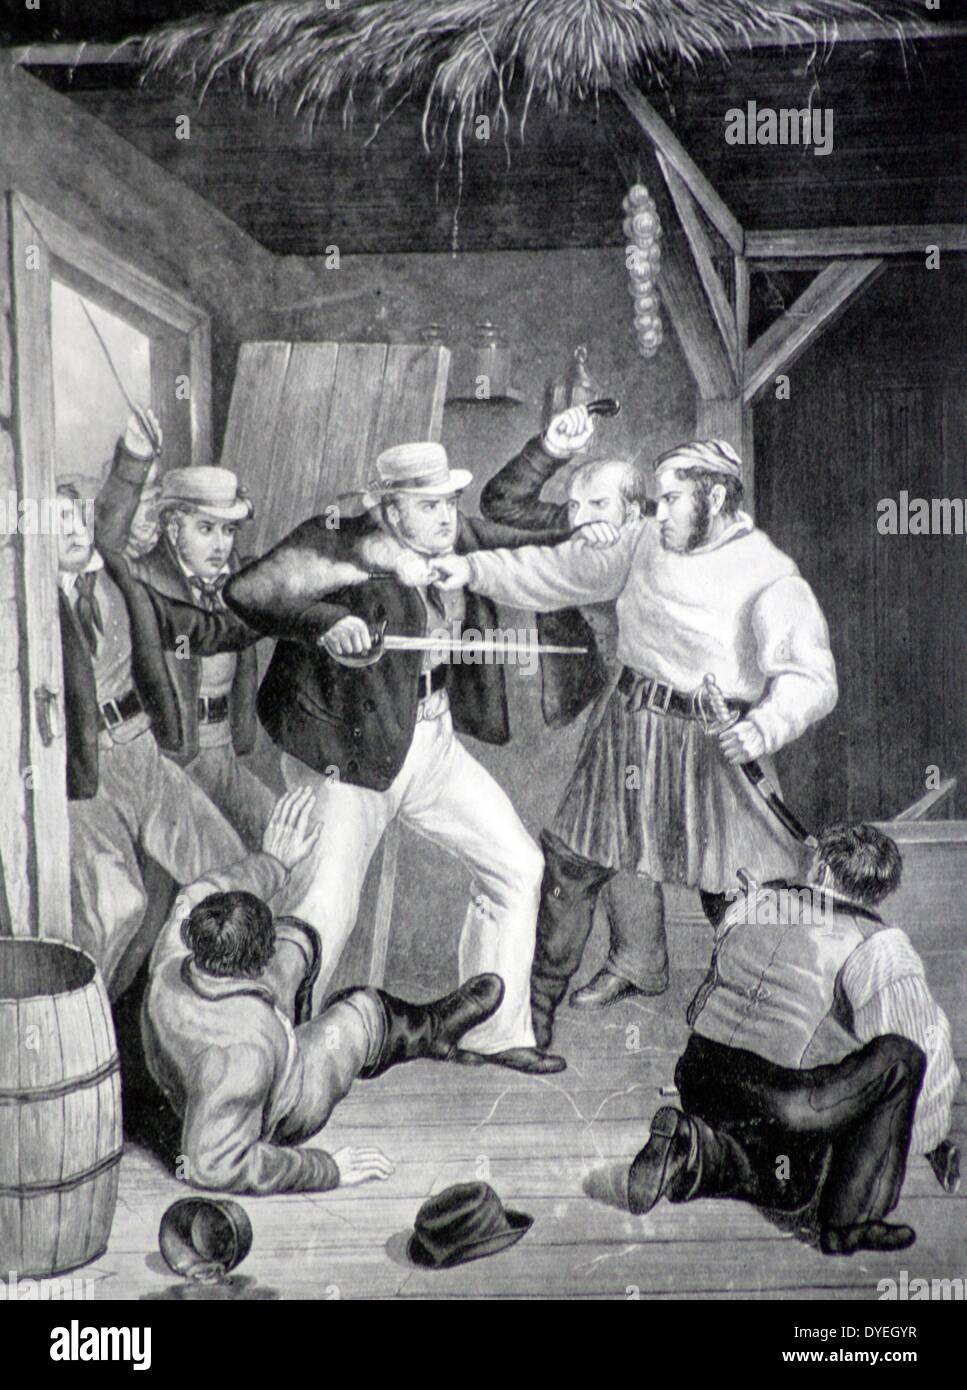 Smugglers surprised by revenue men. From the end of the Napoleonic Wars until the late thirties, the authorities had to take strong measures against the smugglers, especially in Kent and Sussex, and fights between the two were not infrequent. Stock Photo